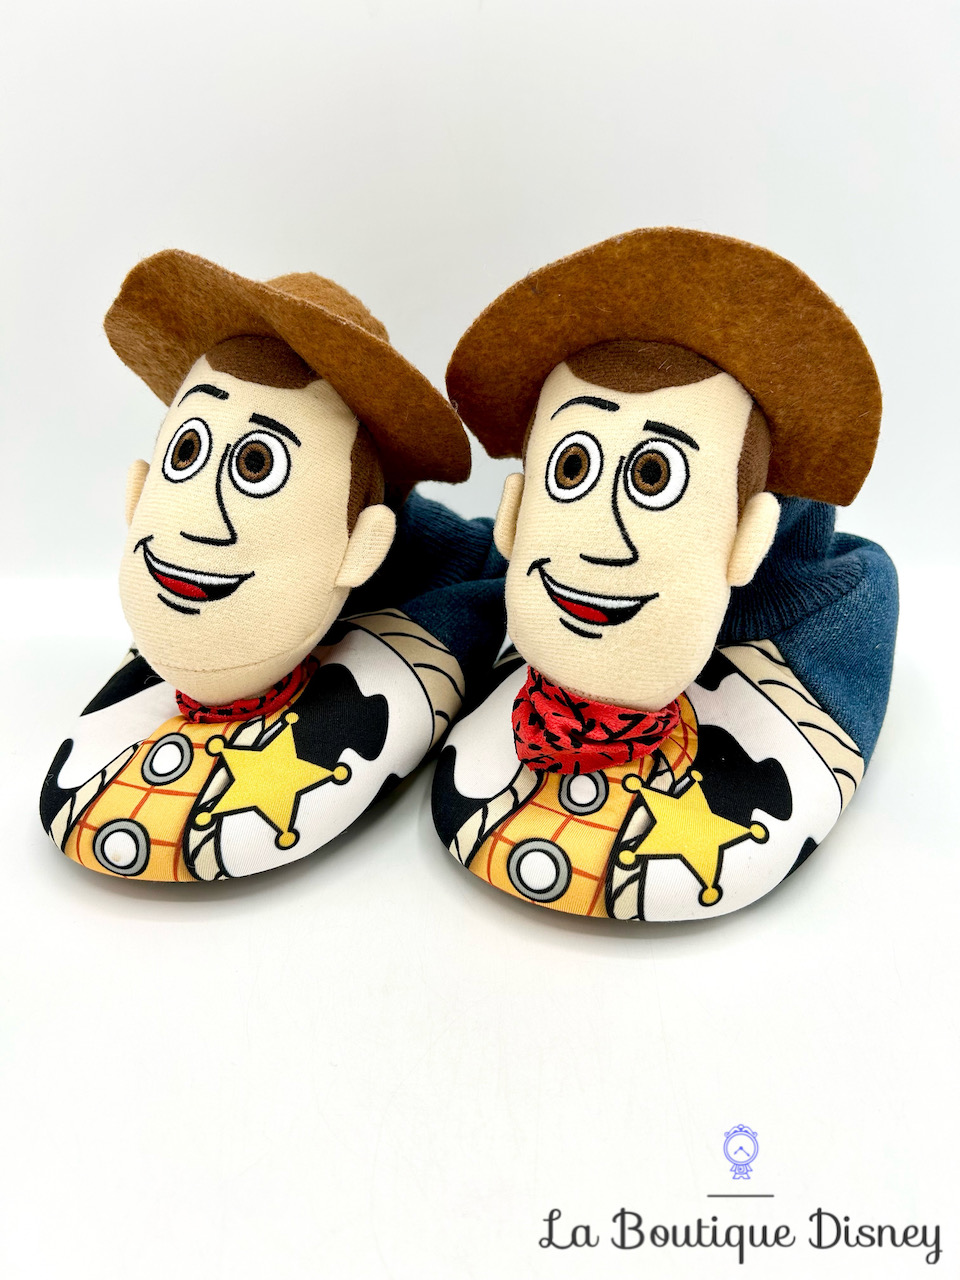 Chaussons Woody Toy Story Disney taille 30-31 pantoufles cow boy relief 3D